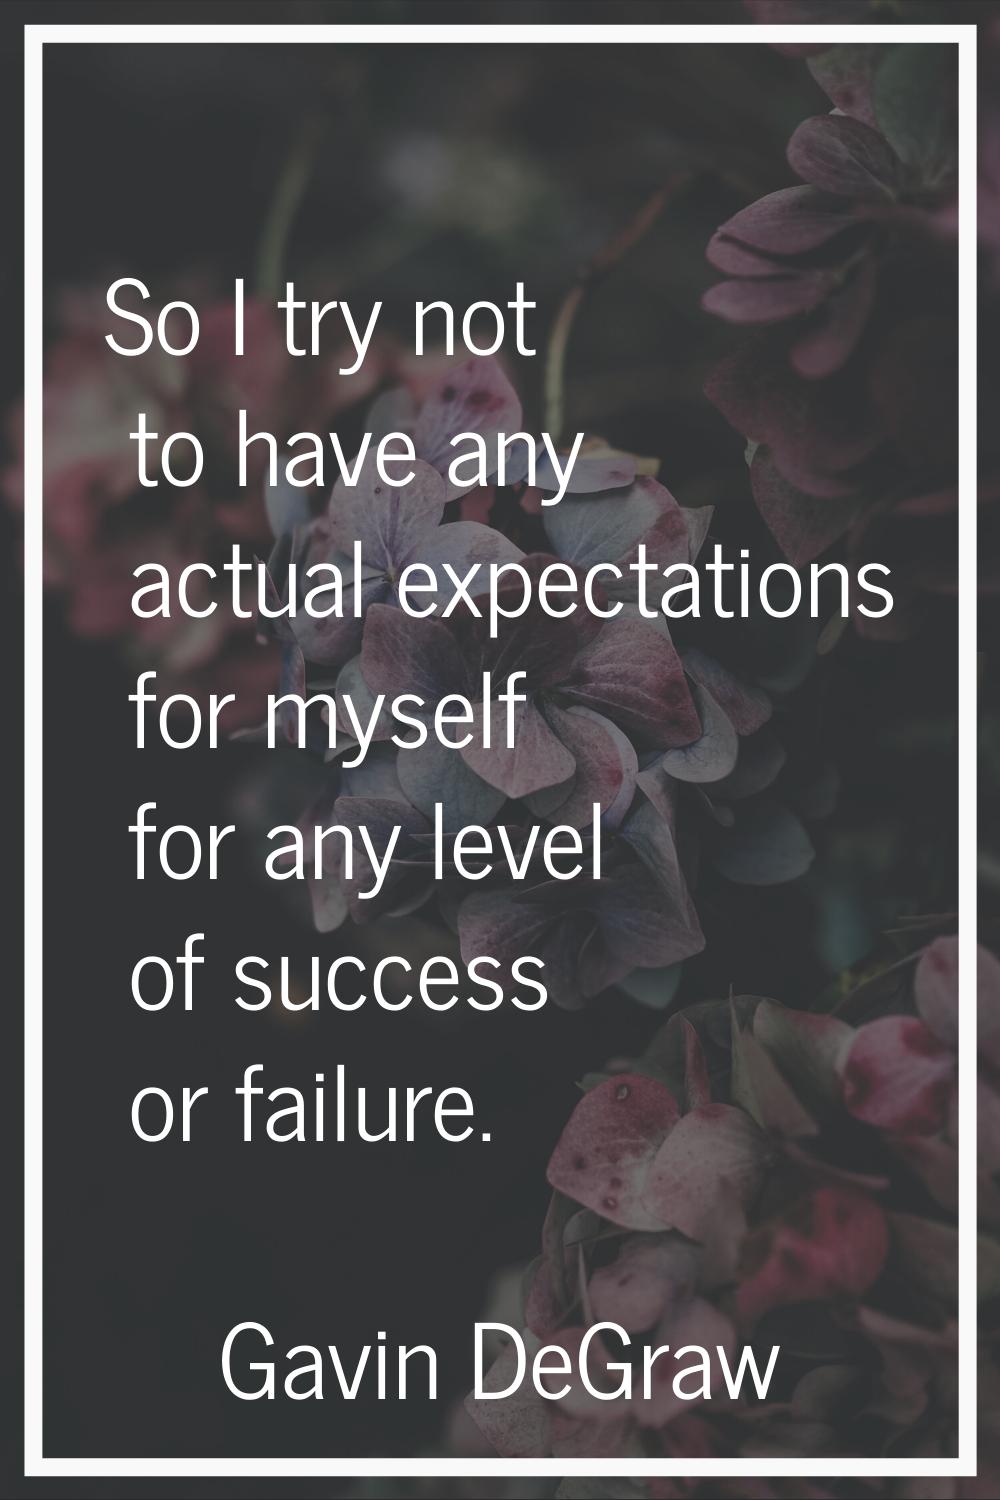 So I try not to have any actual expectations for myself for any level of success or failure.